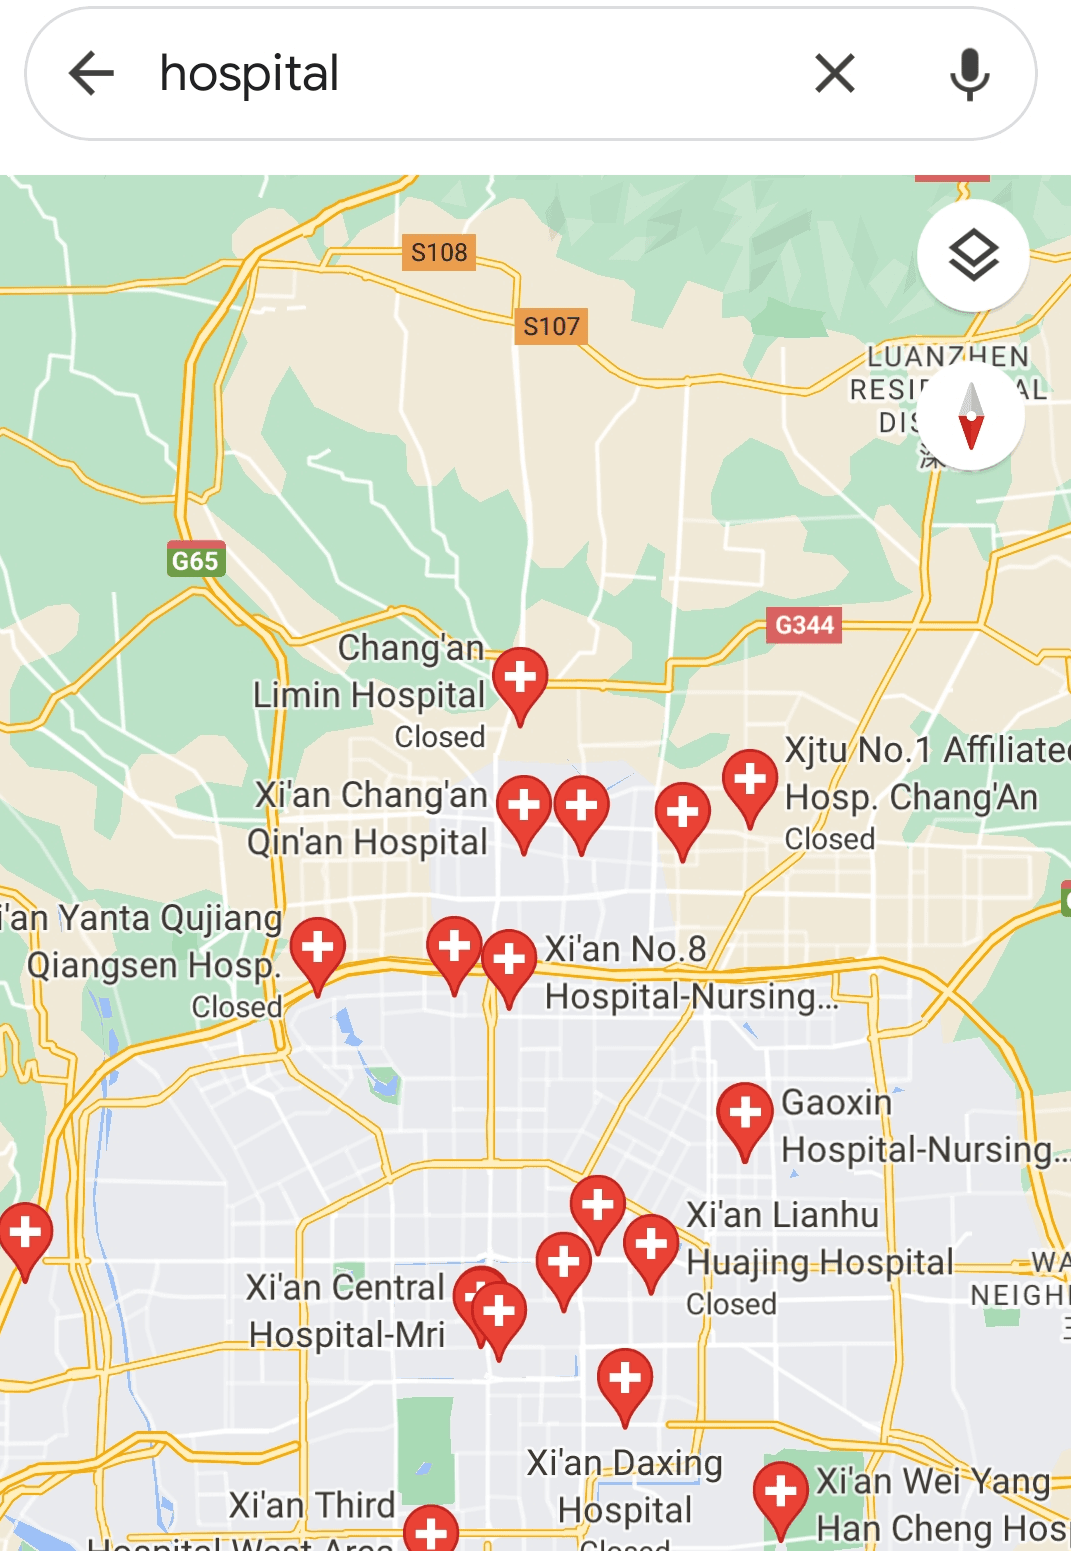 Hospitals in Google maps